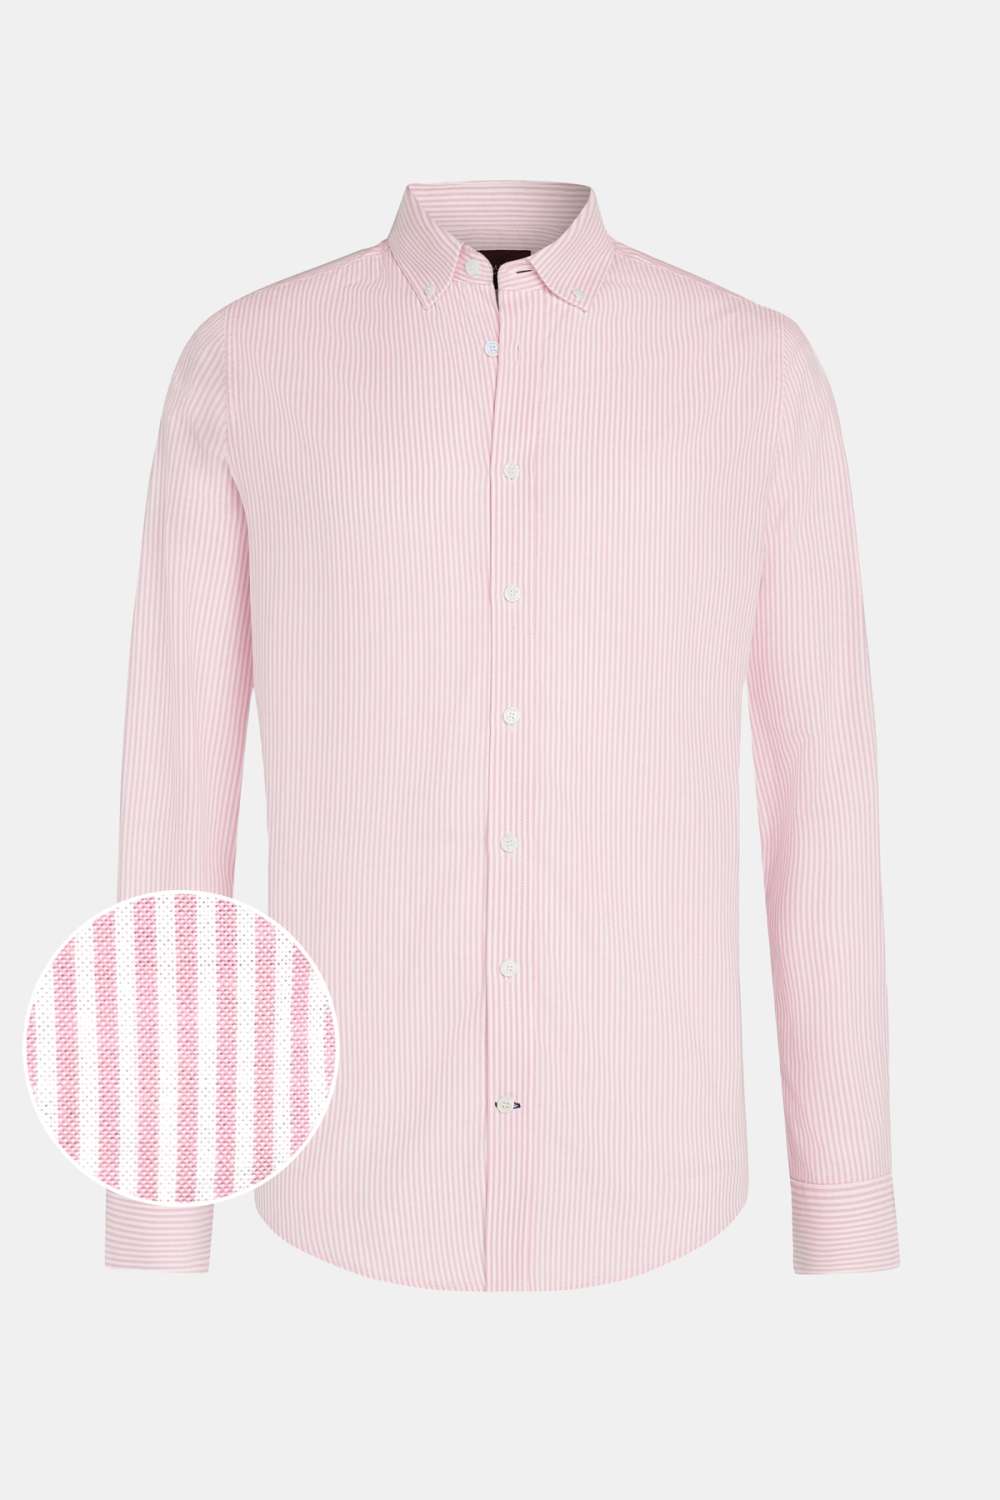 Dinghies - The Oxford Shirt